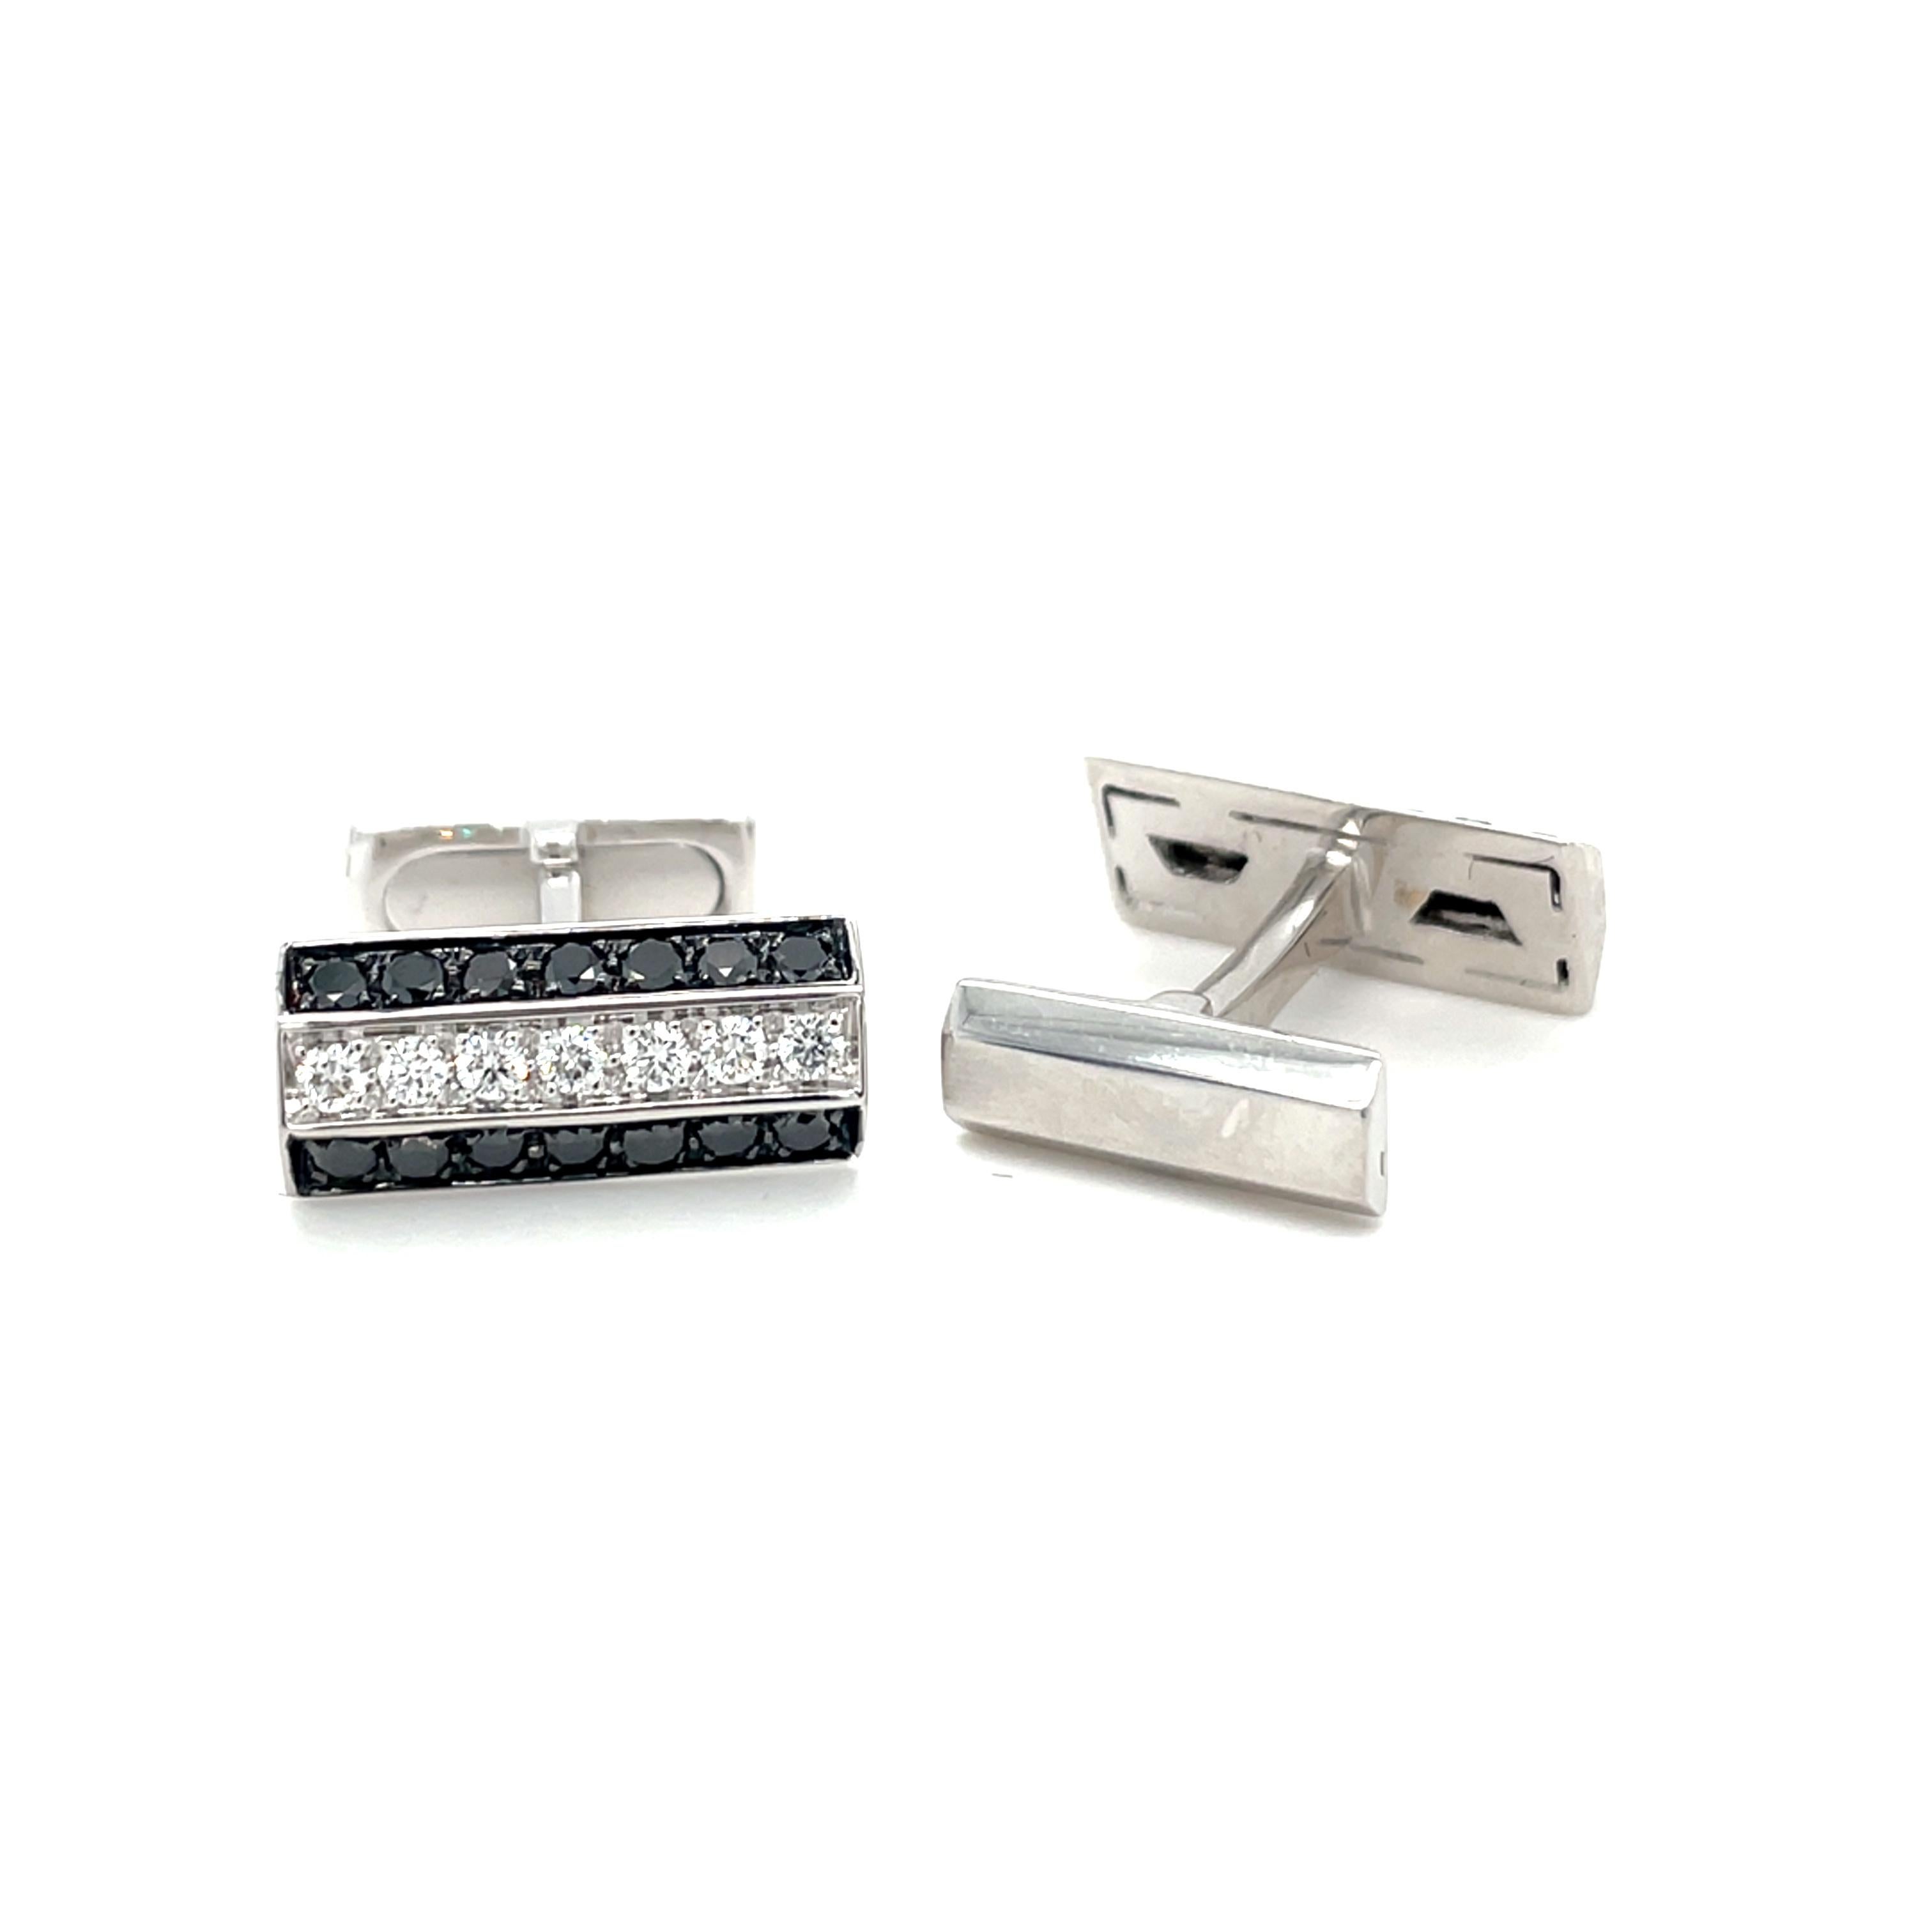 These white gold cufflinks are from Men's Collection. These cufflinks are decorated withblack diamonds Diamonds 1.06ct and diamonds G color VS clarity 0.56. The dimensions of the cufflinks are 1.8cm x 0.7cm. These cufflinks are a perfect upgrade to